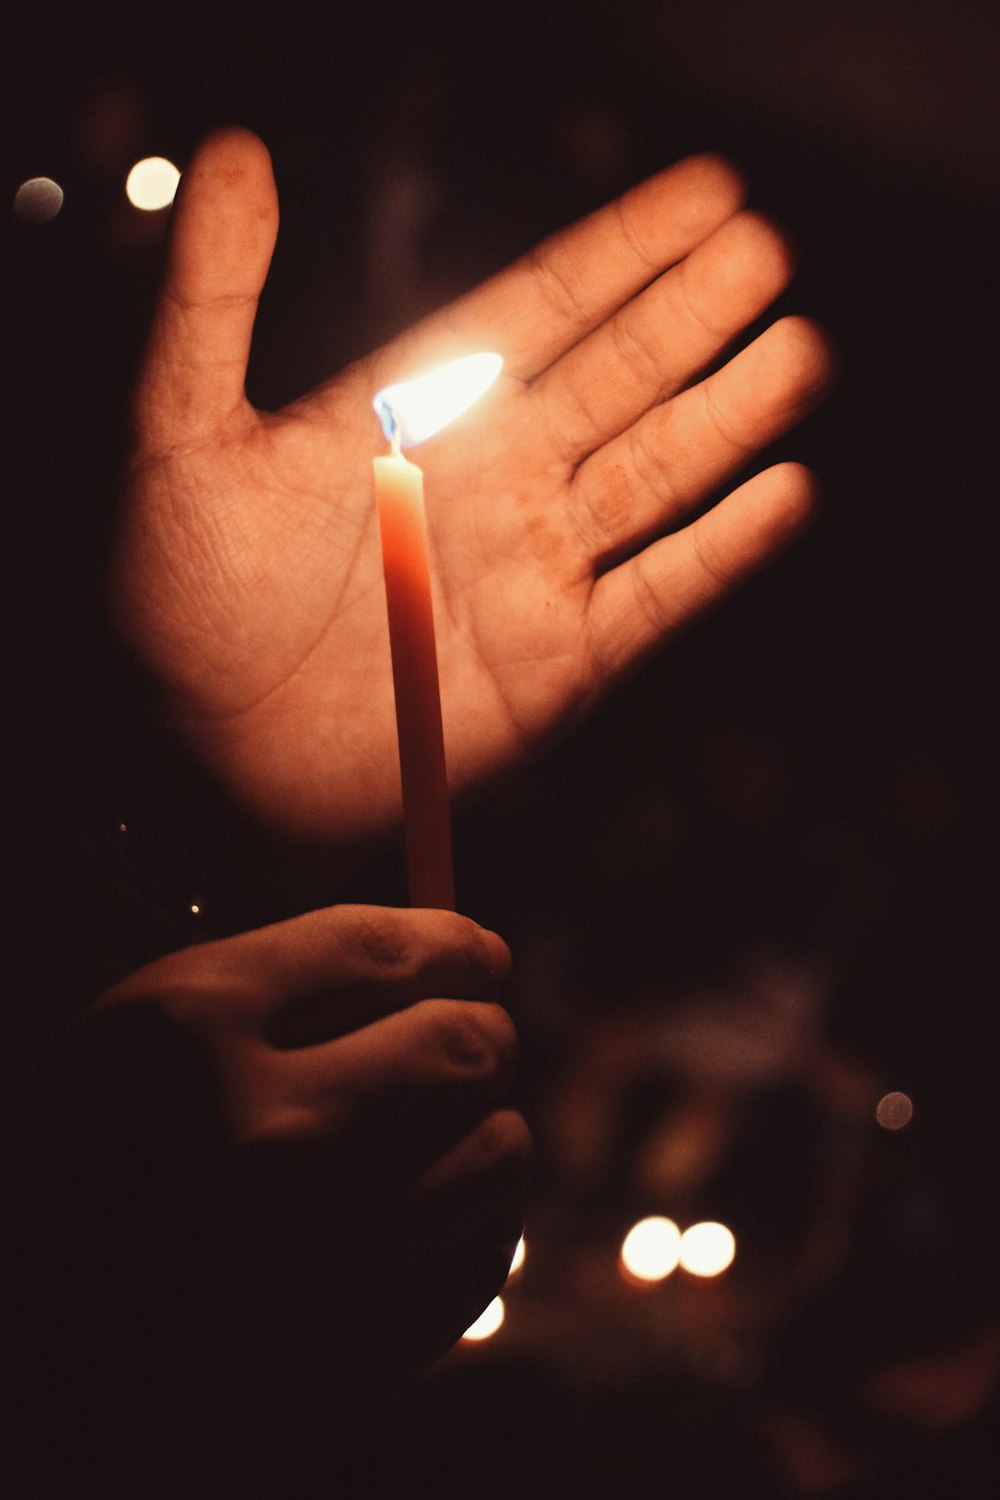 person holding lit candle near palm